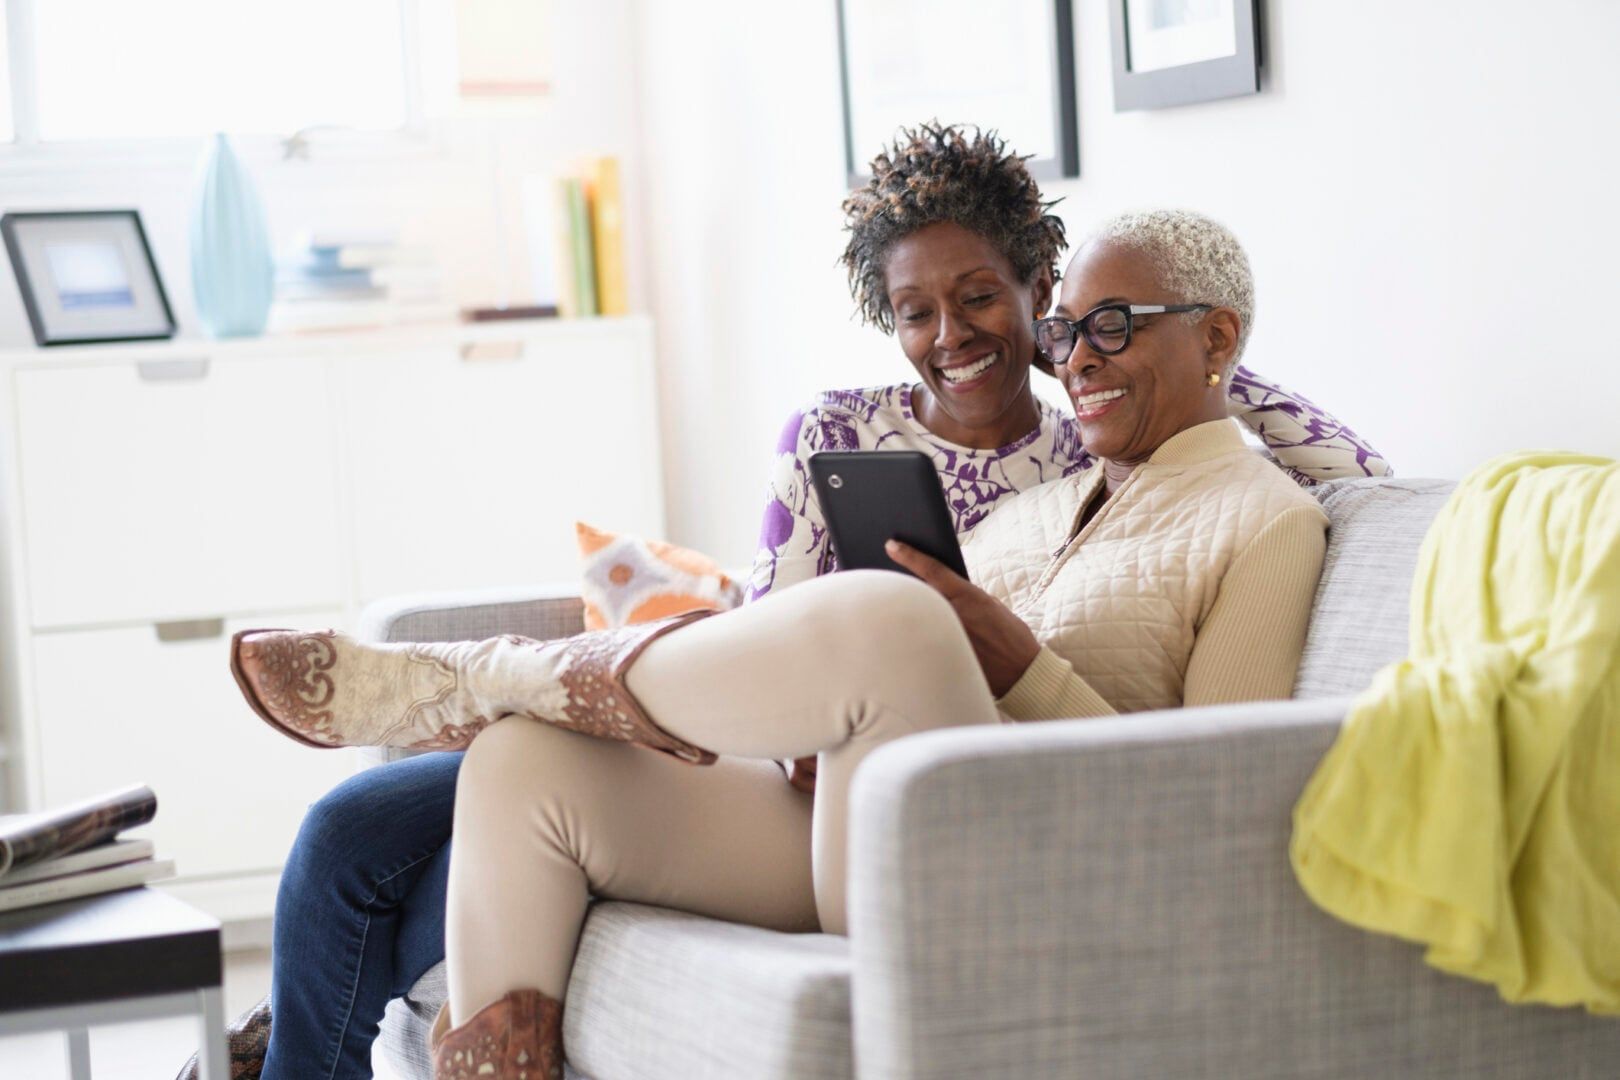 How to help LGBTQ+ seniors stay connected and supported by their community